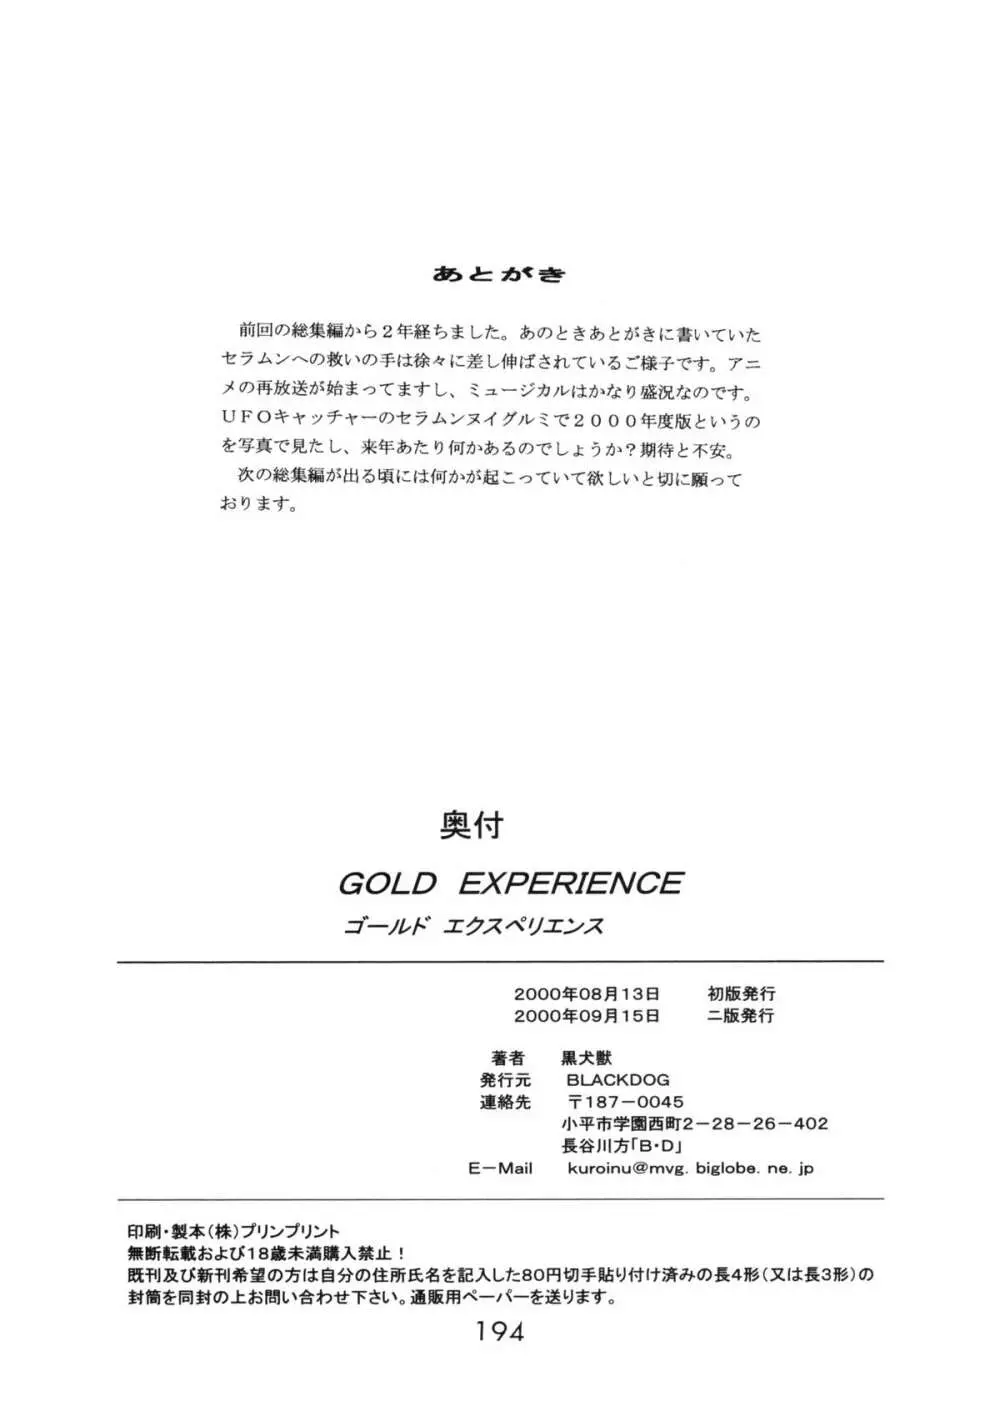 GOLD EXPERIENCE - page191